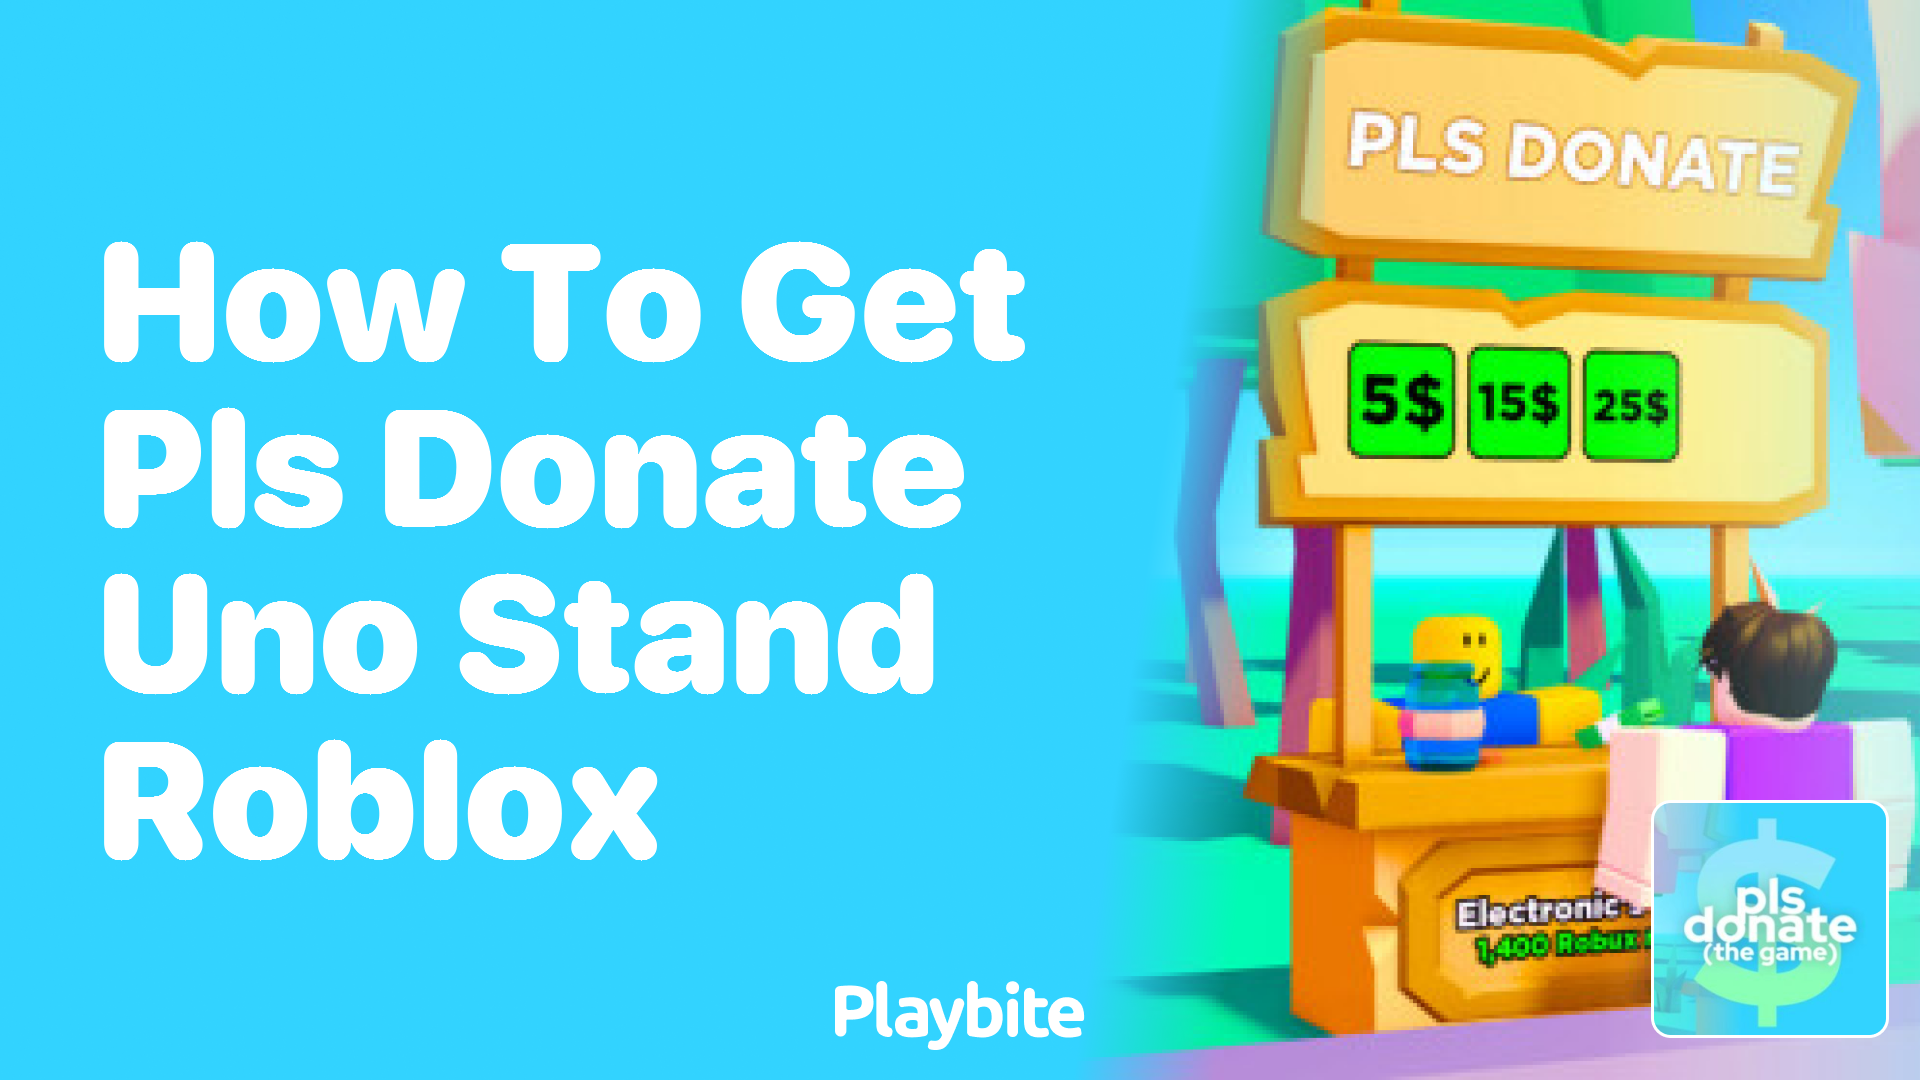 How to Get the PLS DONATE Uno Stand in Roblox